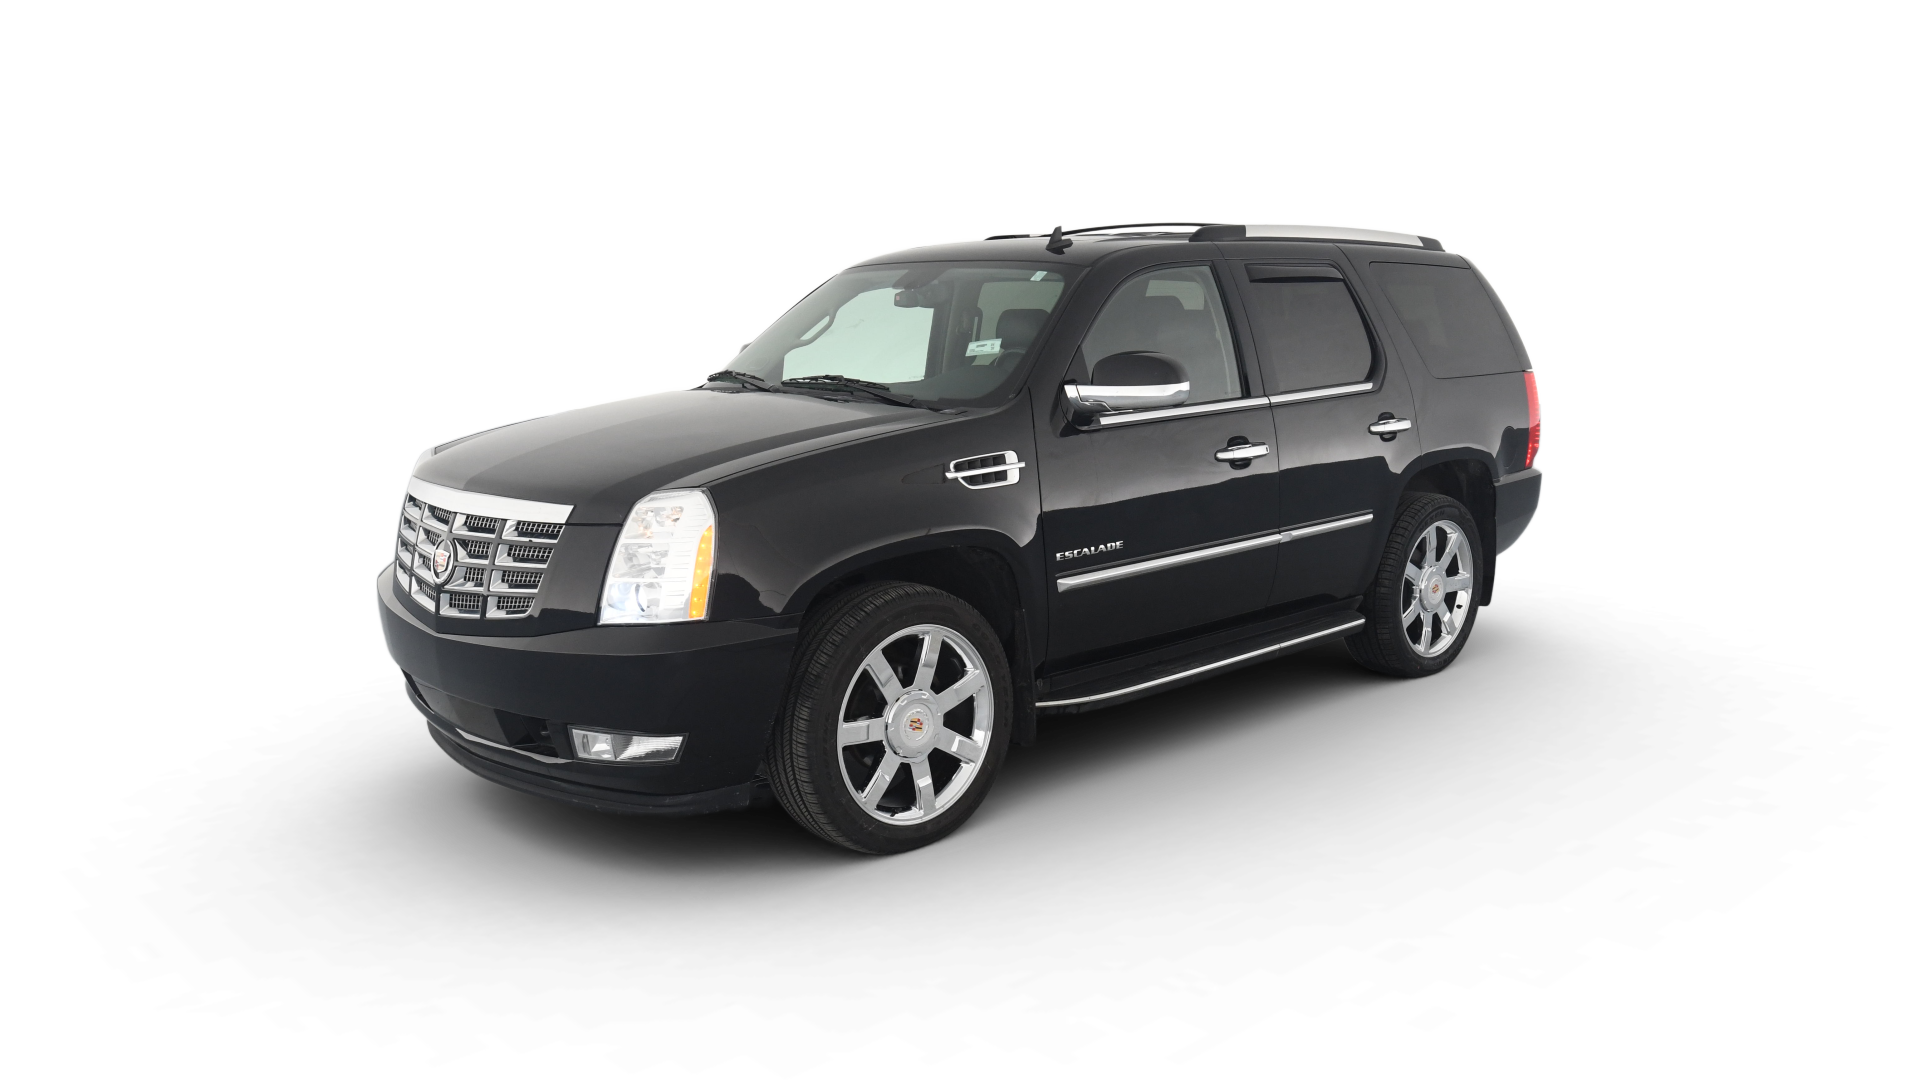 Used Cadillac Escalade For Sale Online | Carvana